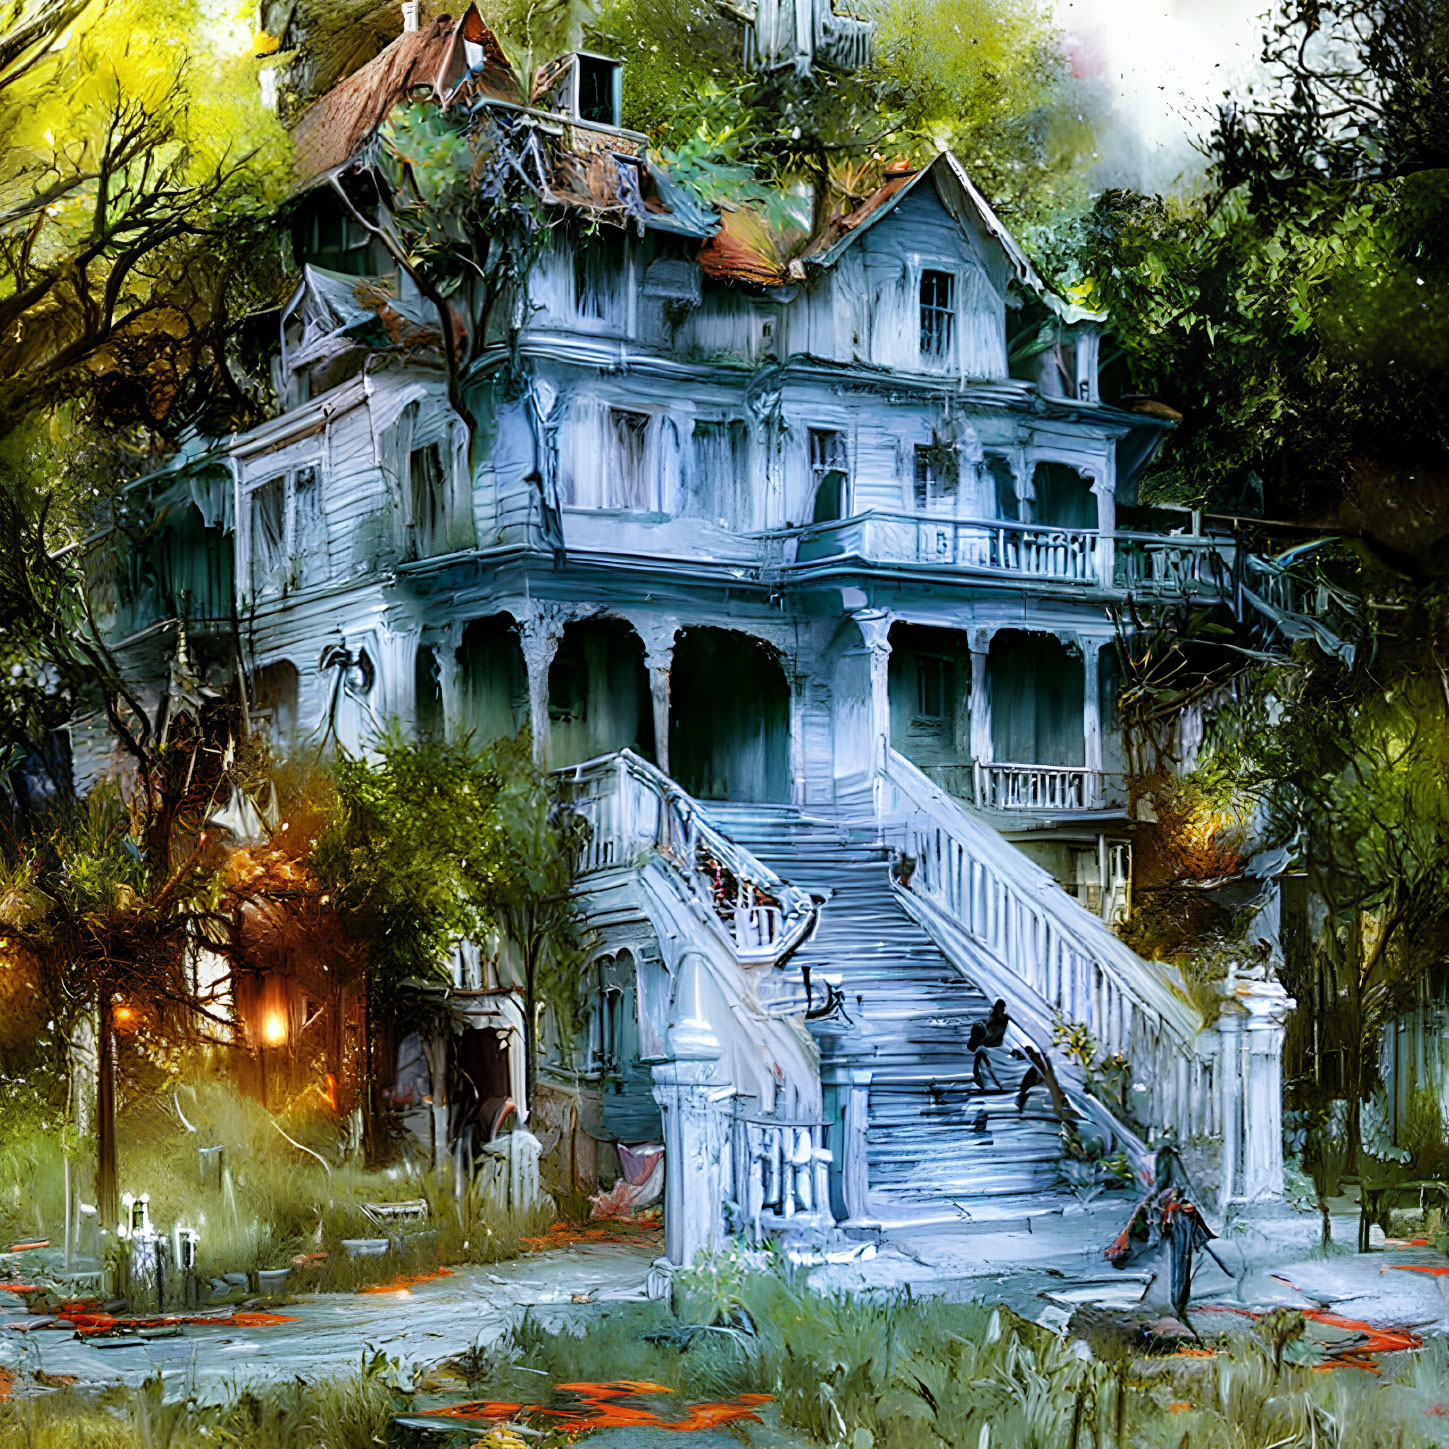 Spooky Victorian mansion with grand staircase and eerie ambiance